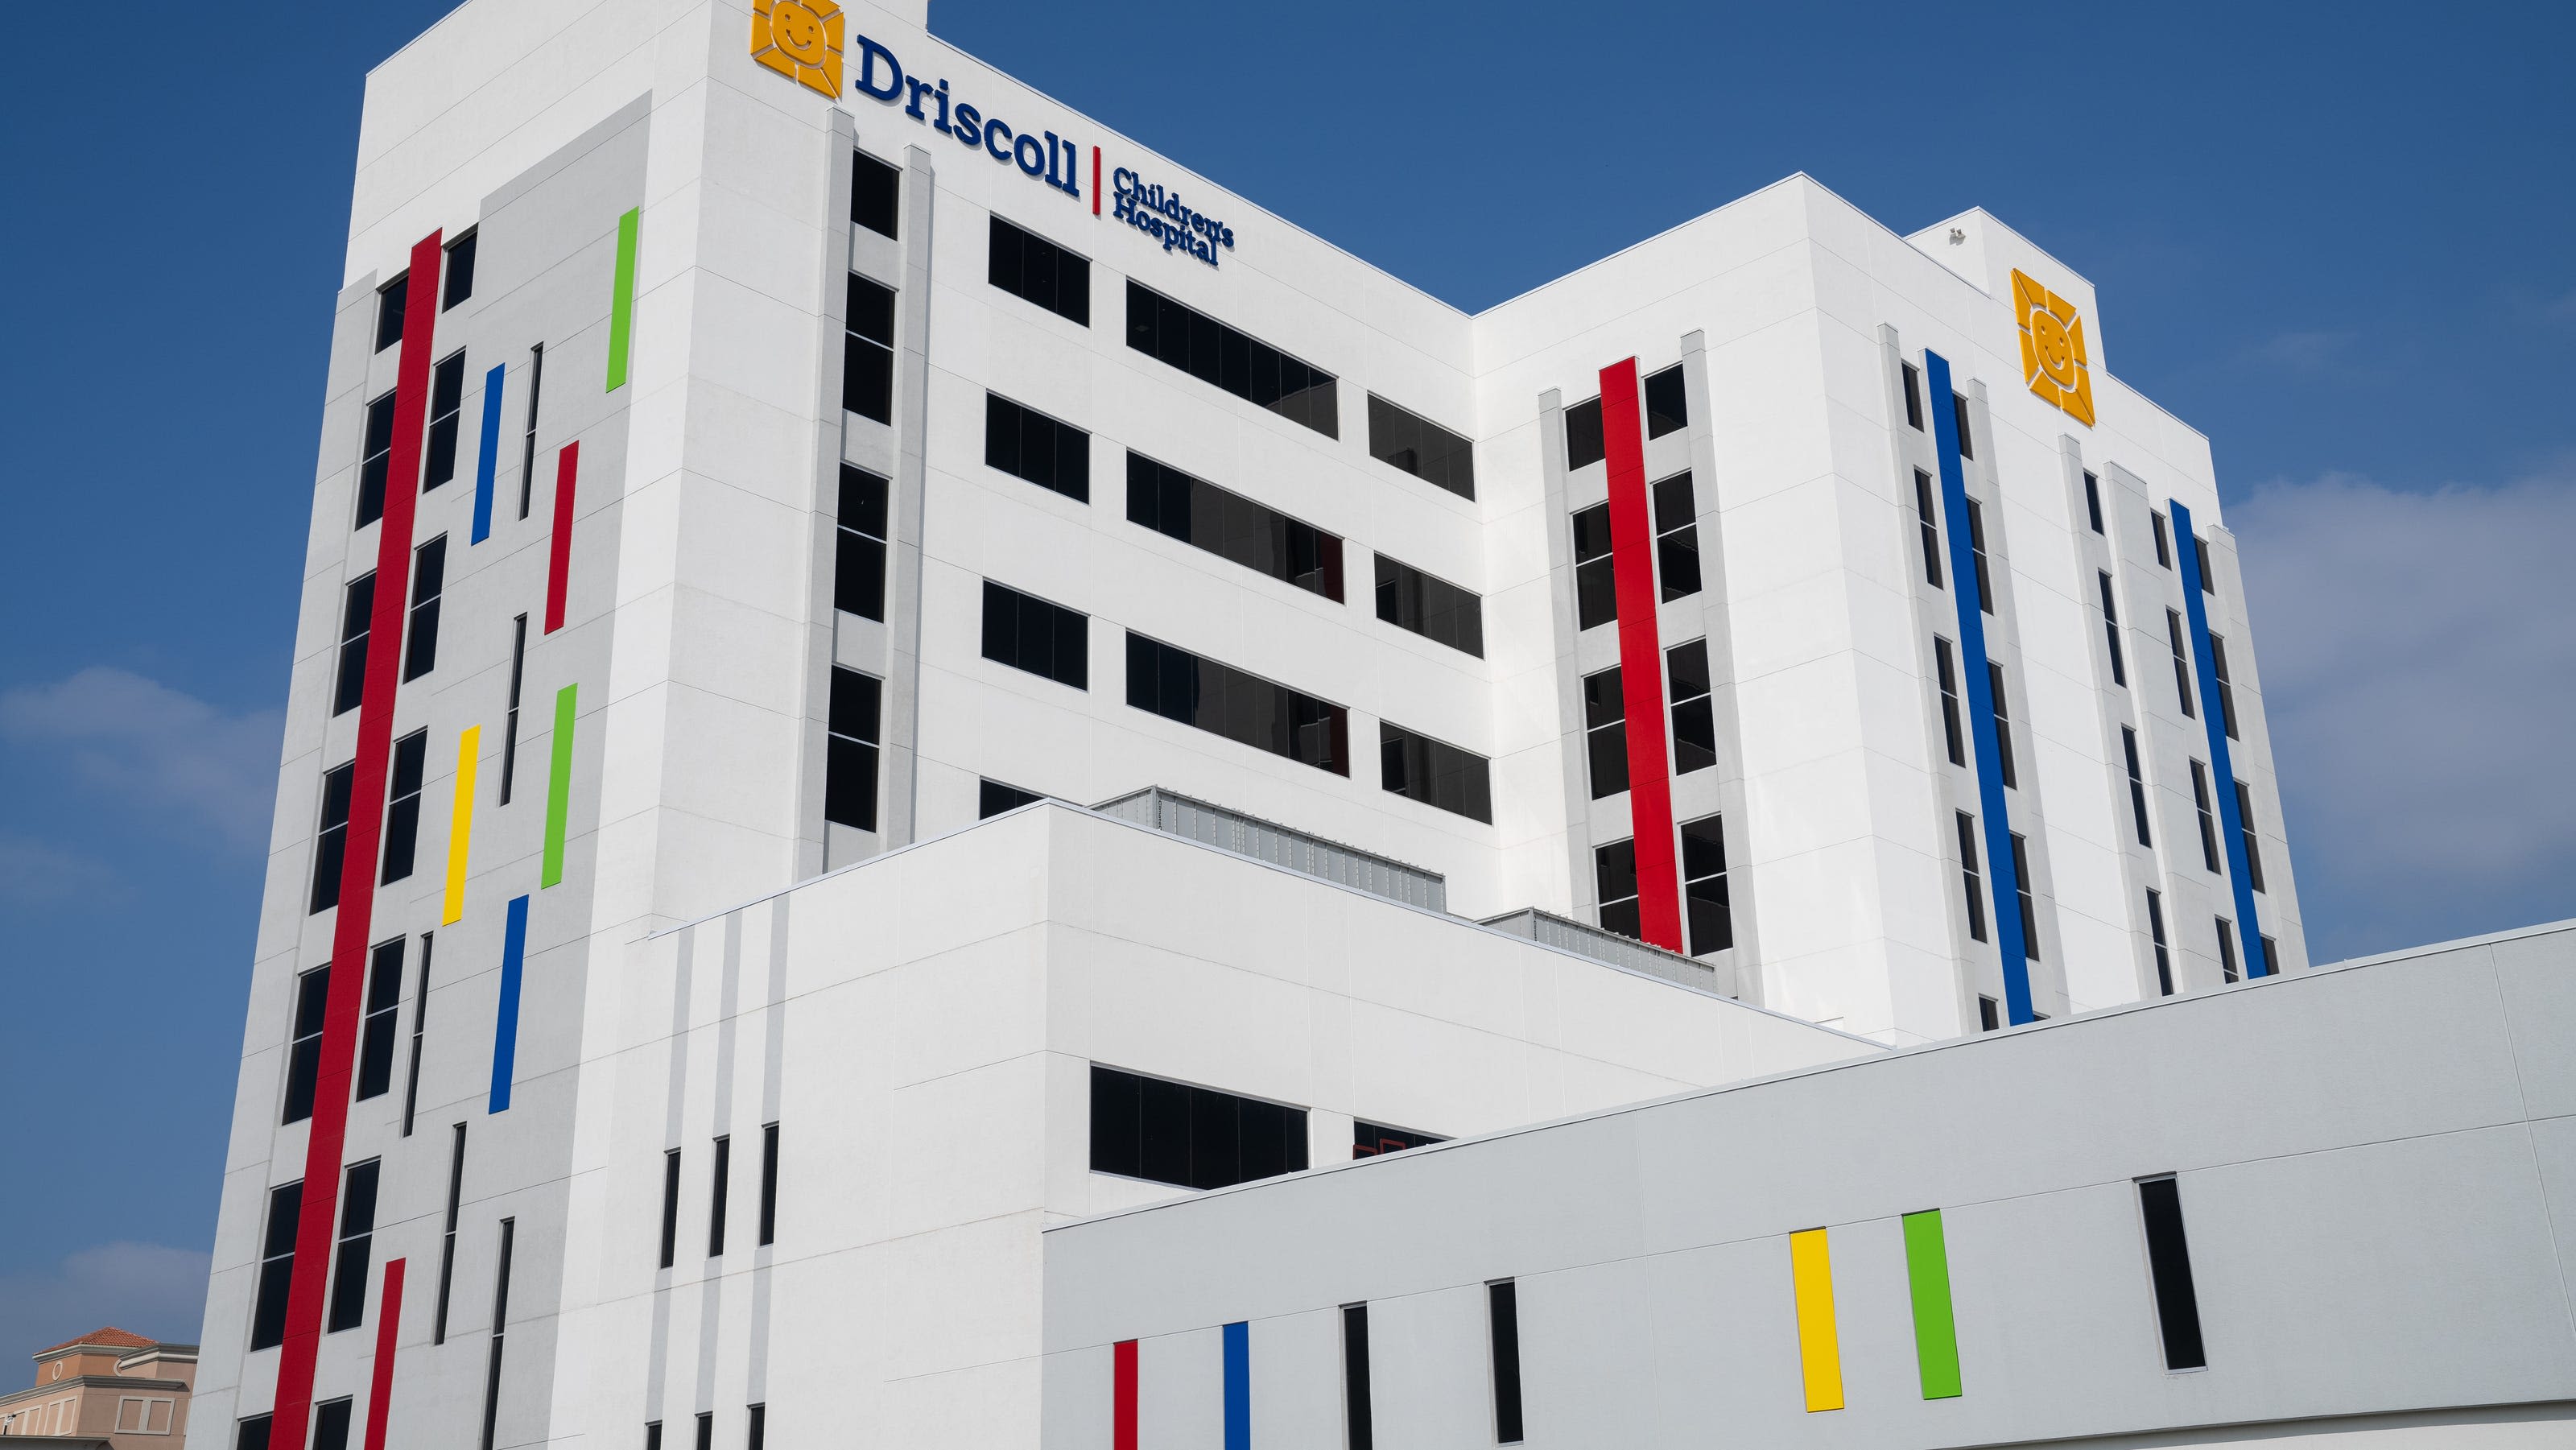 Story from Driscoll Children's Hospital: Healthcare in the Rio Grande Valley changes forever